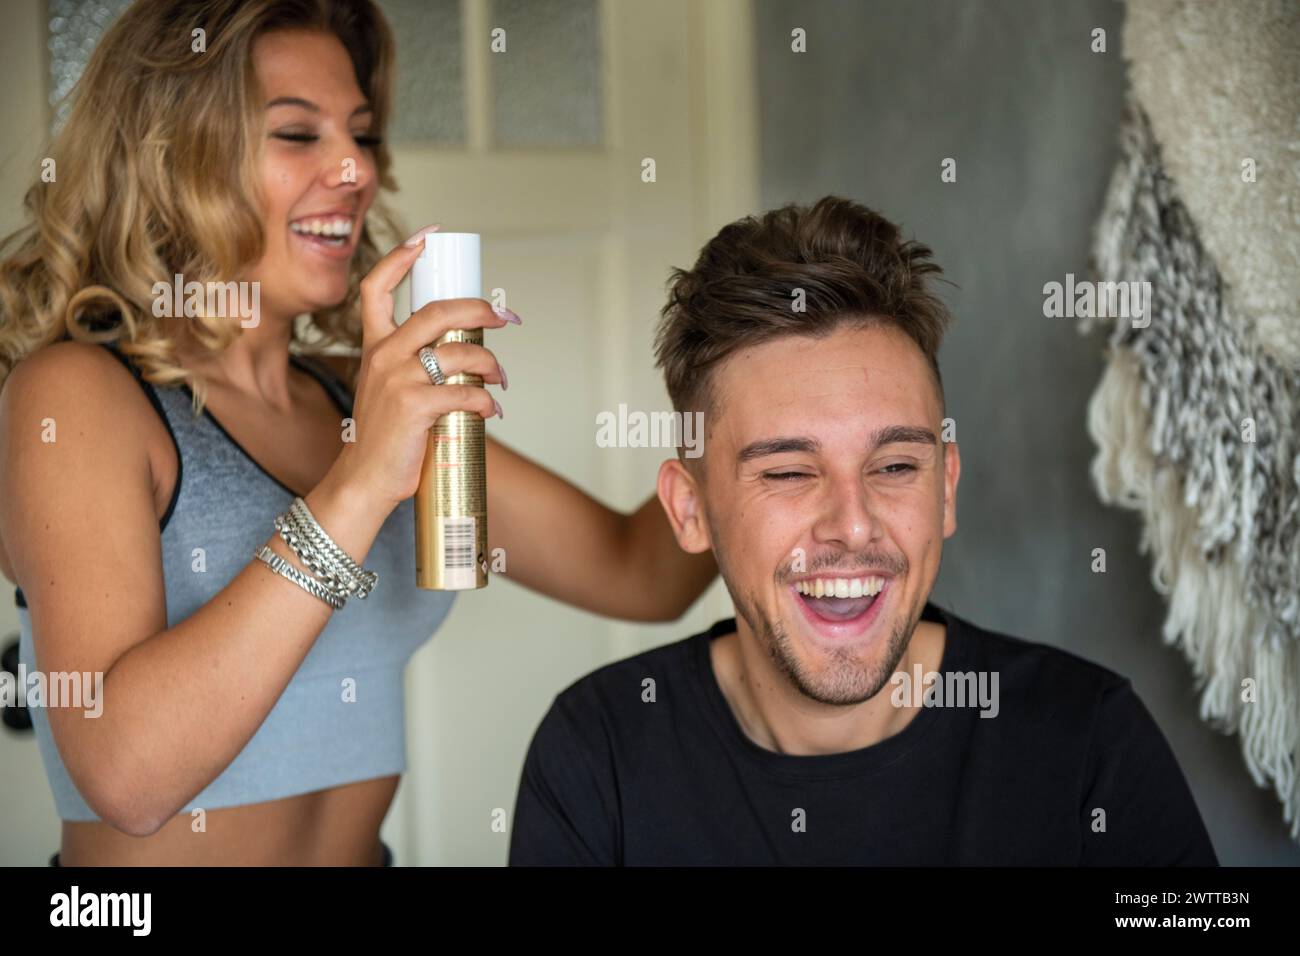 Woman styling man's hair with hairspray, both laughing in a candid moment. Stock Photo